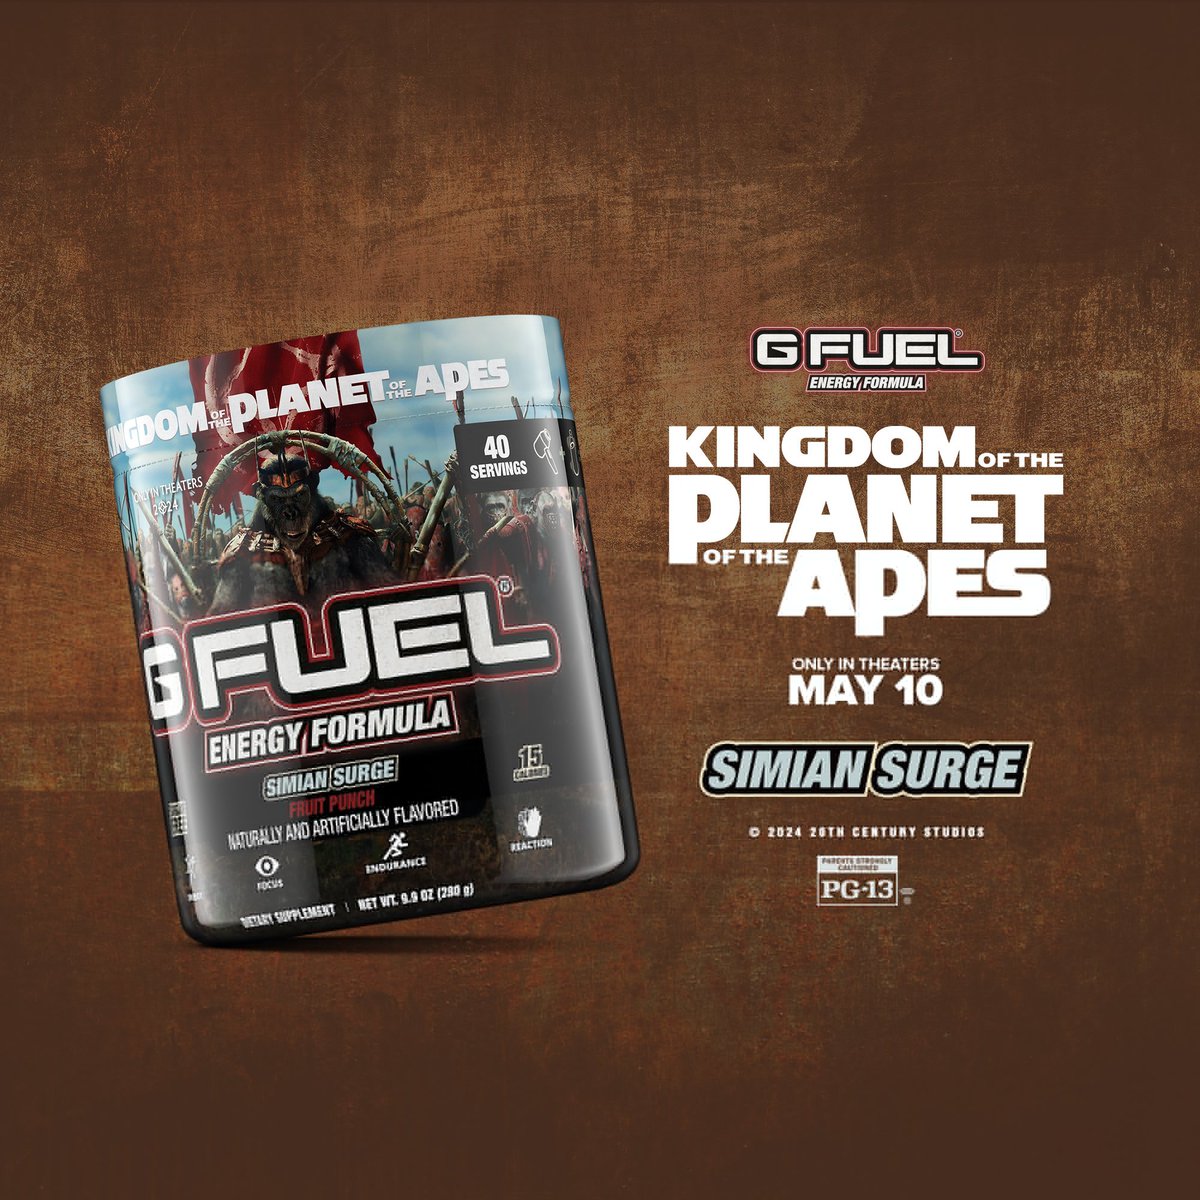 Who wants to try this #GFuel flavor?